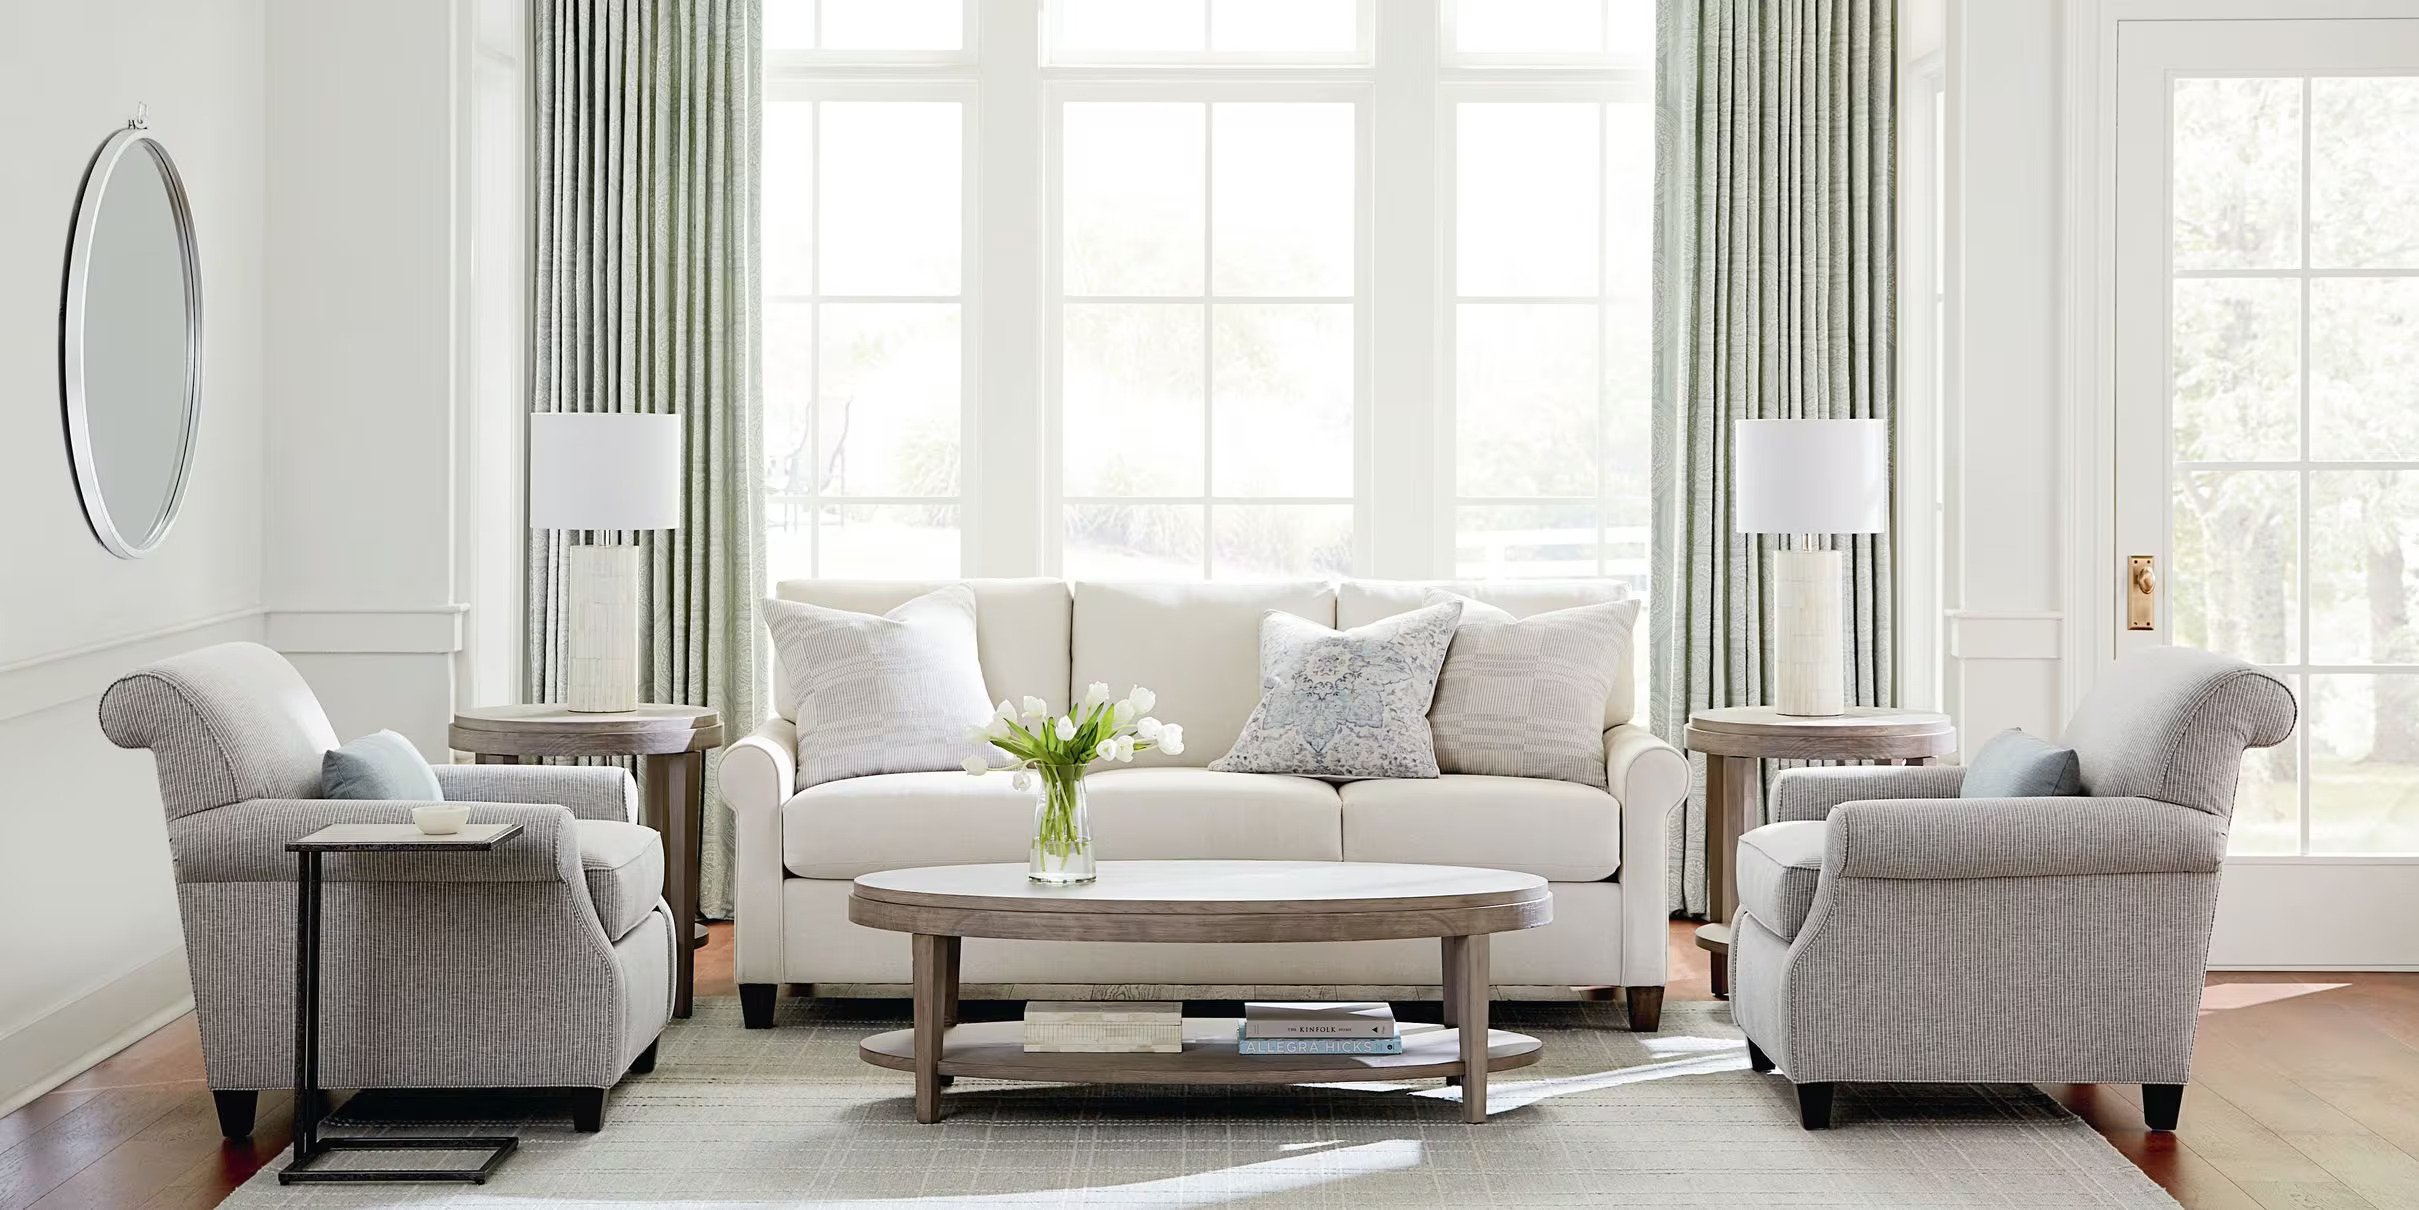 Julian Sofa in Neutral Tone with Accent Chairs and Occasional Tables